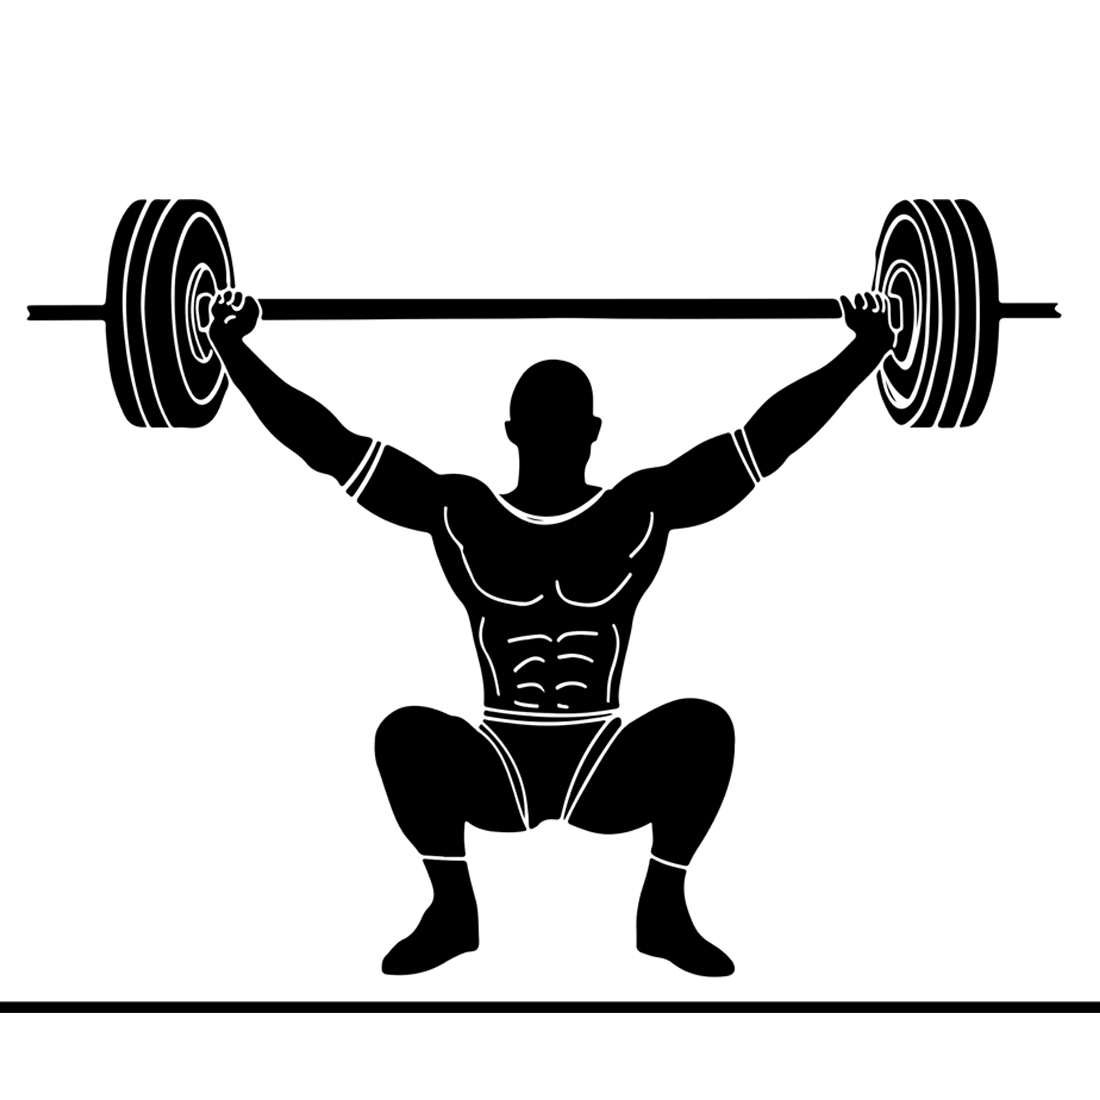 Monochrome Fitness: Weightlifter Silhouette and Barbell Drawing, Dynamic Strength: Silhouette of Weightlifter Lifting Barbell, Muscle Power: Weightlifter Silhouette with Big Barbell preview image.